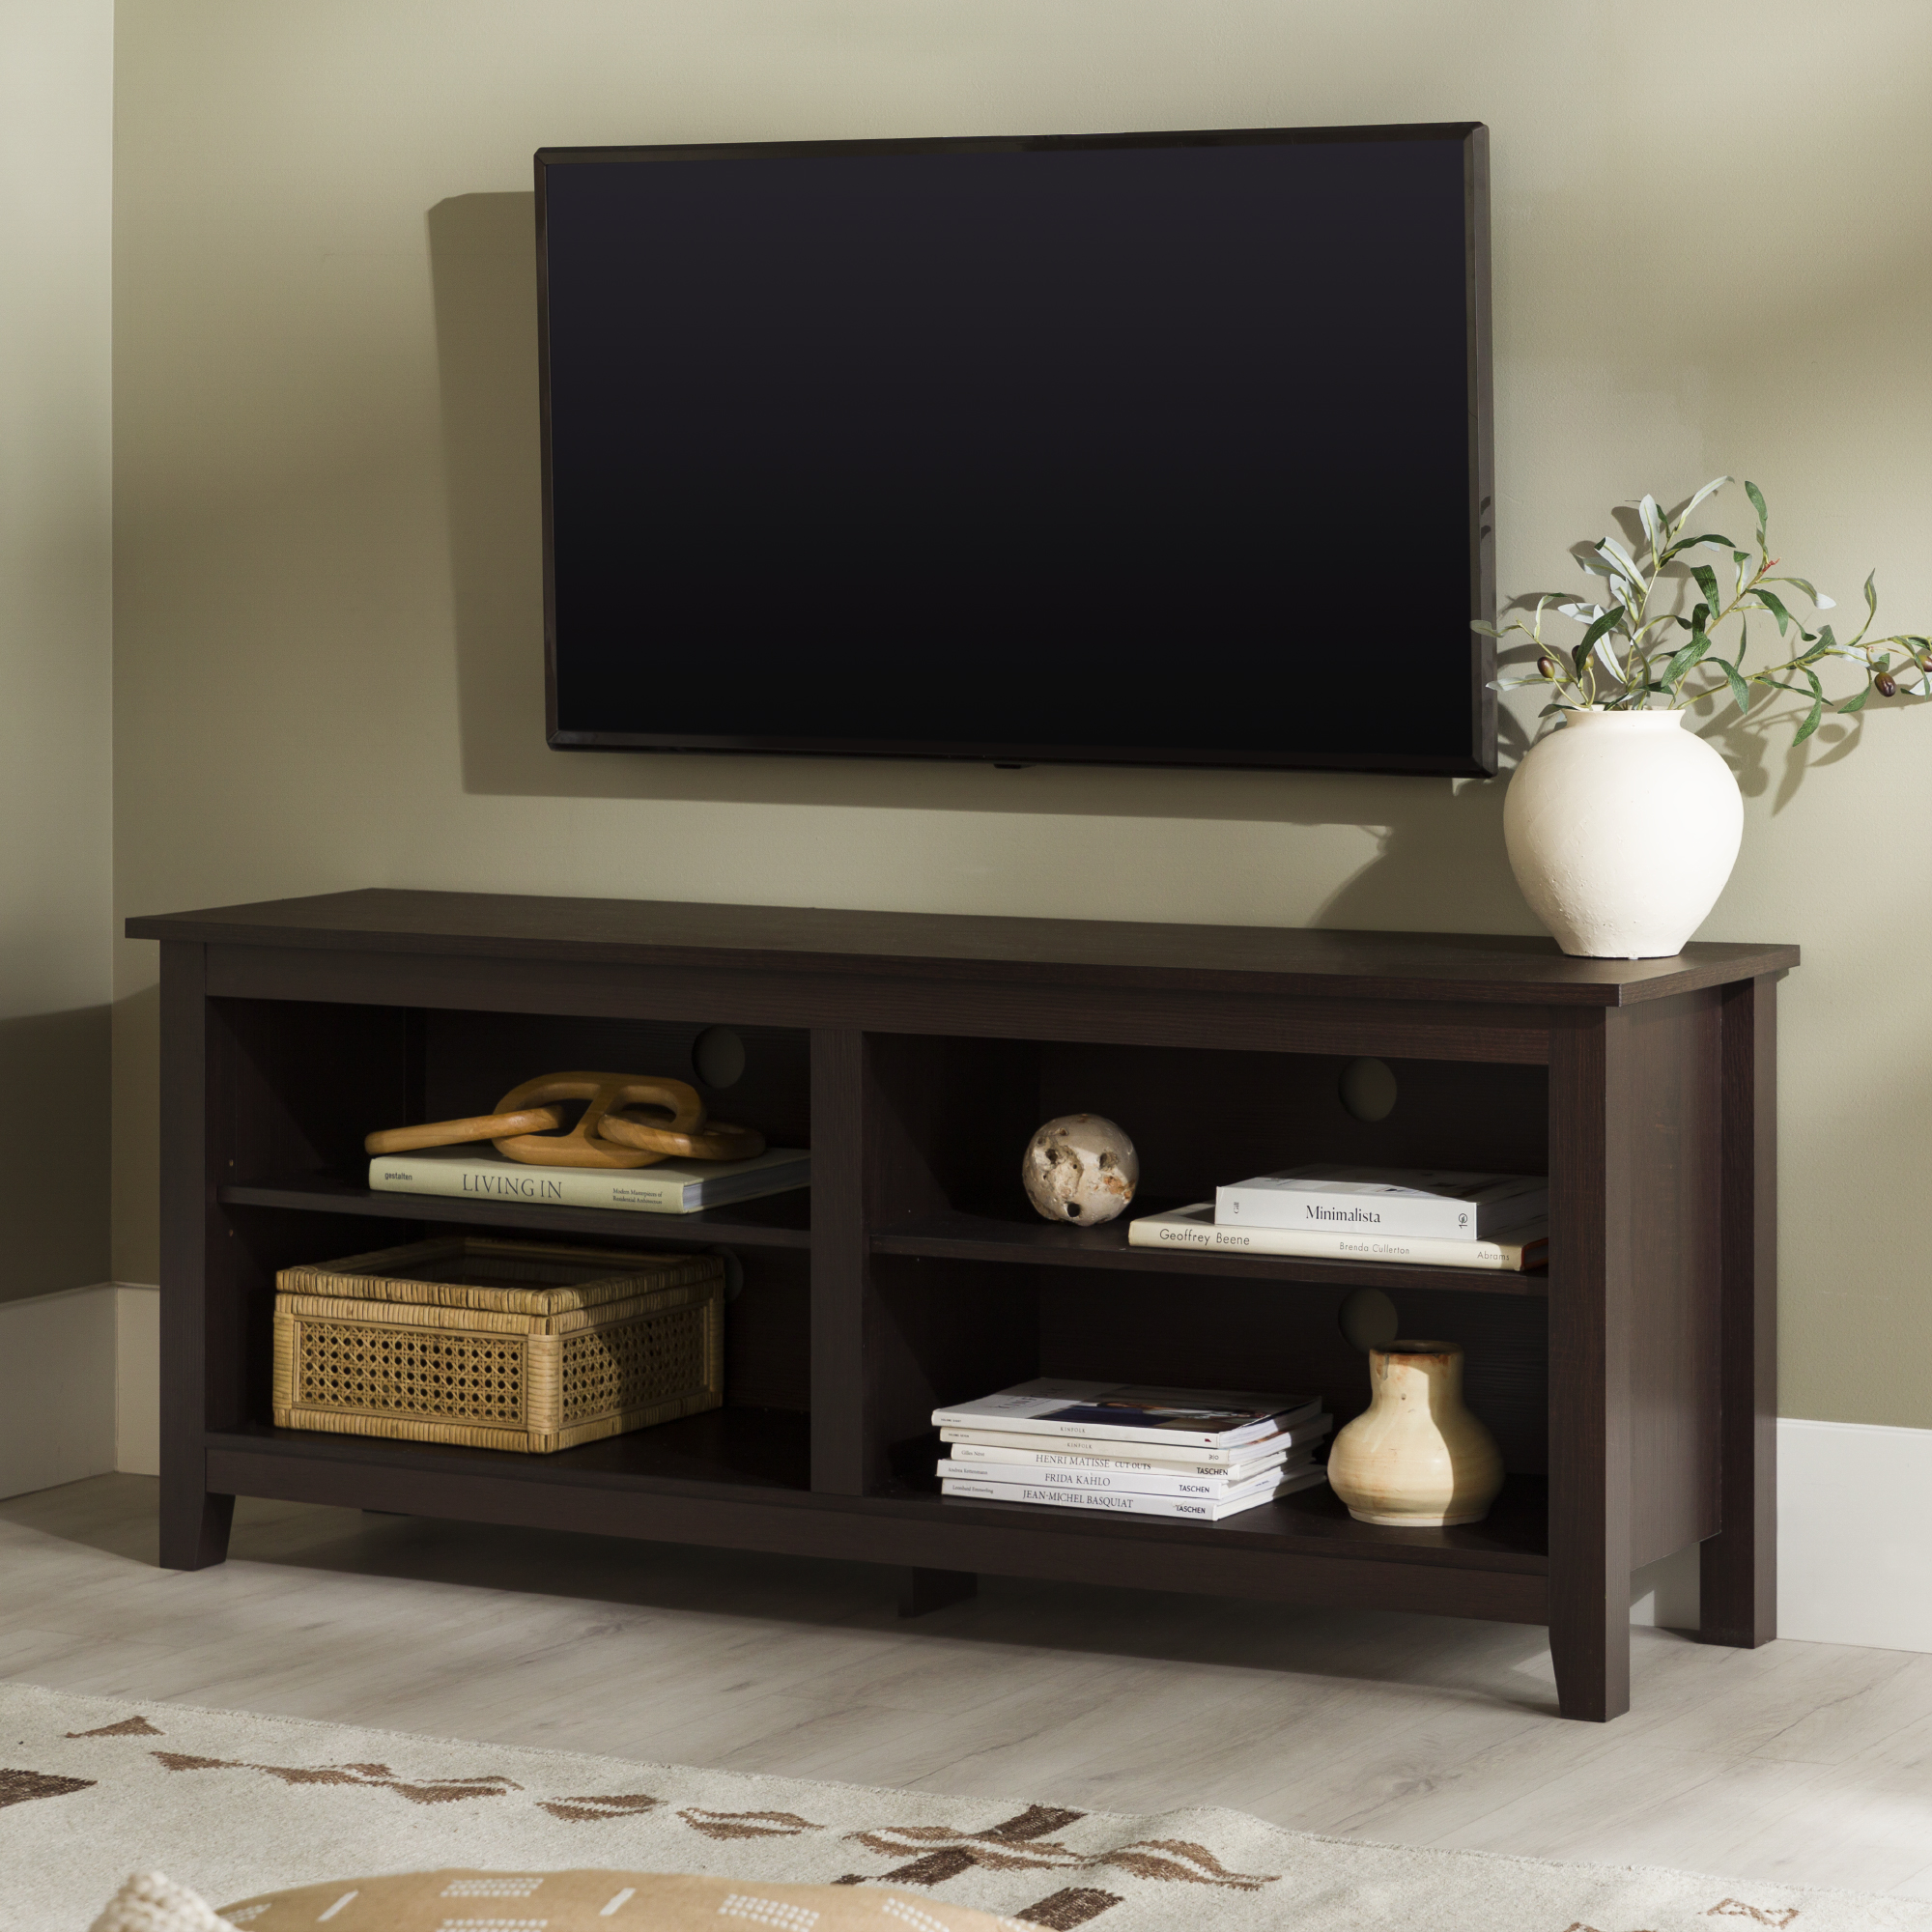 Walker Edison Contemporary Wood TV Media Storage Stand for TVs up to 60" - Espresso - image 1 of 7